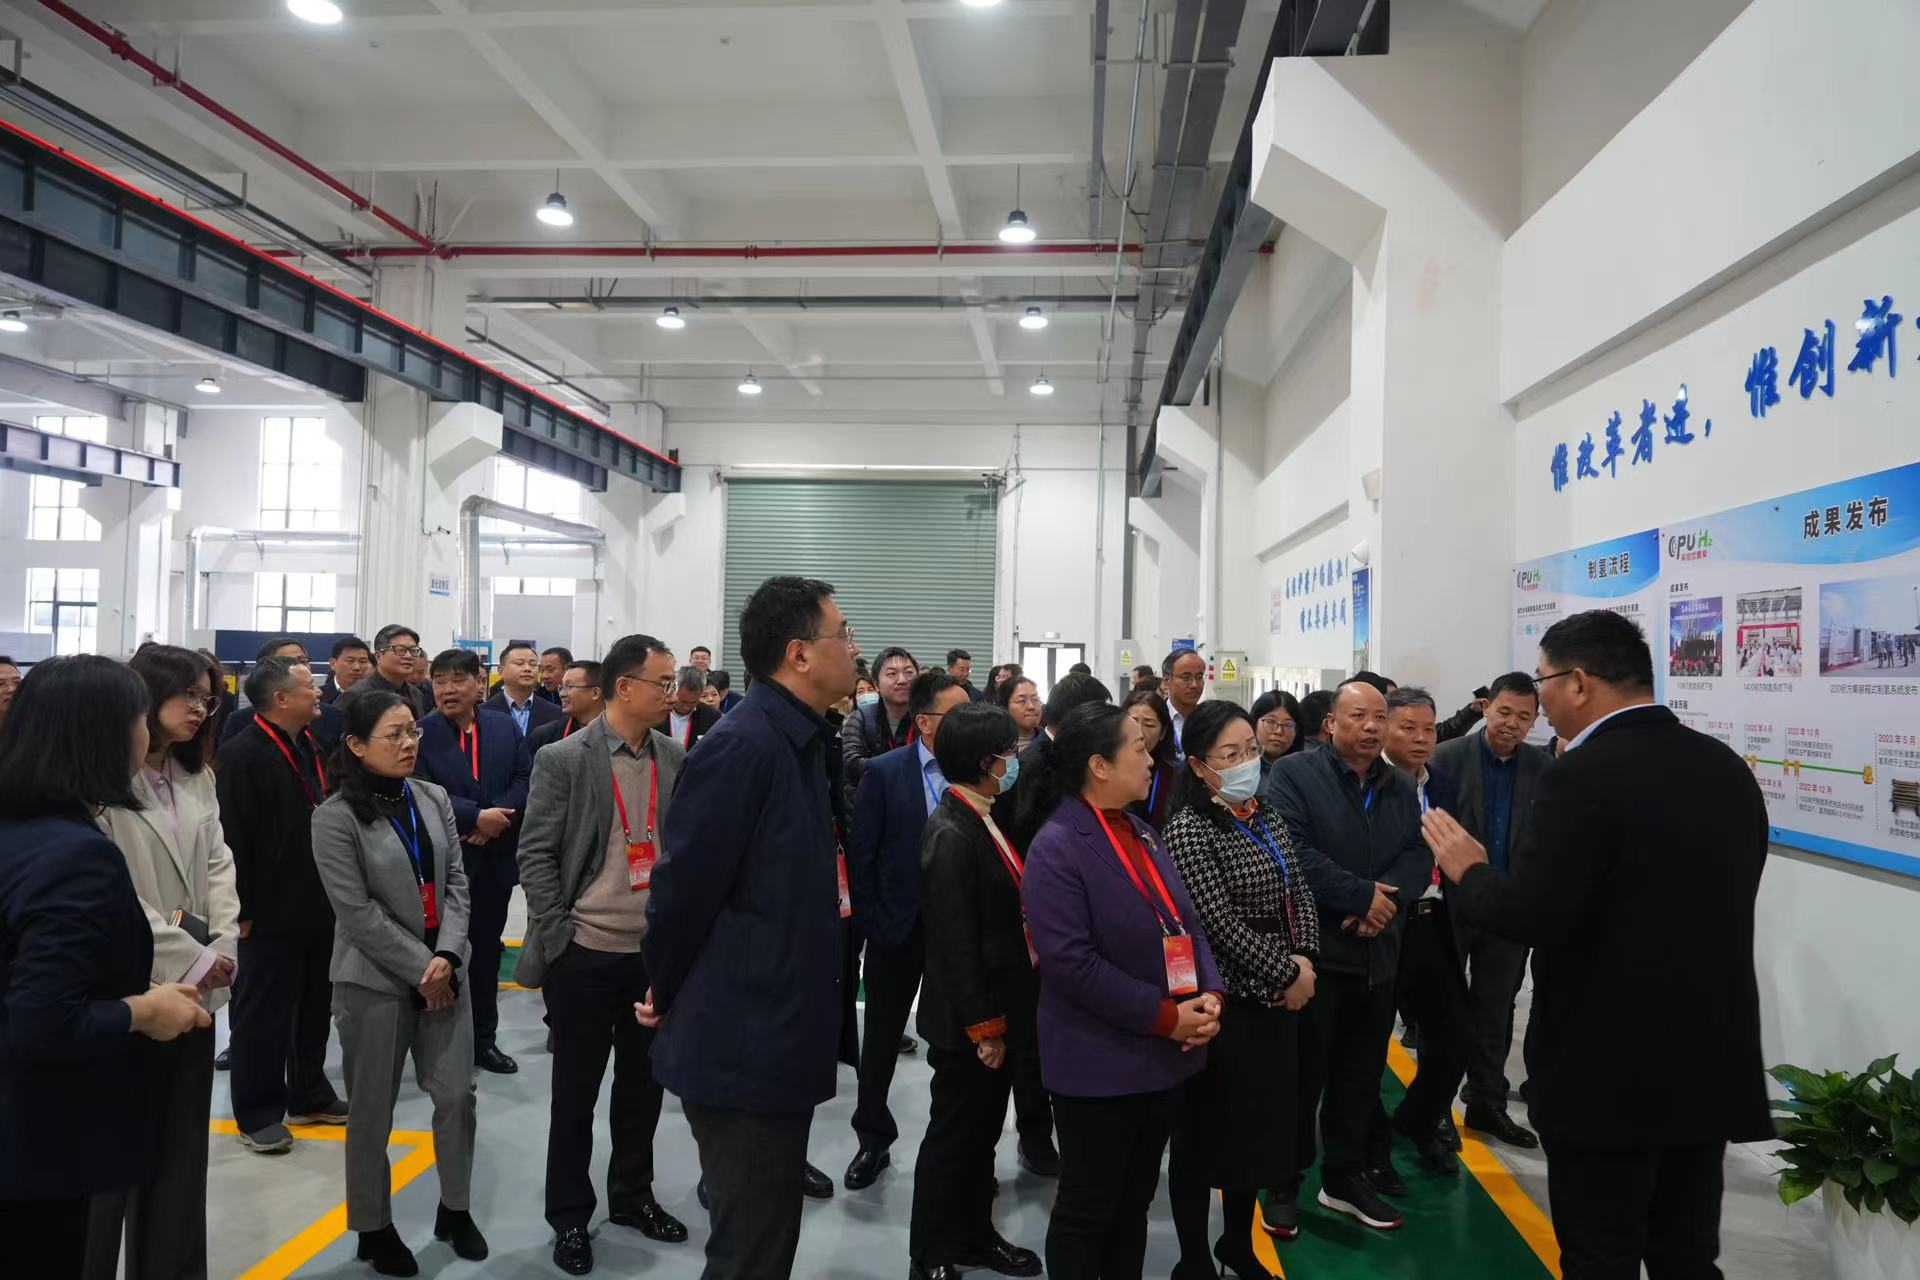 Joint Inspection Group of Xiangcheng District People's Congress Deputies and CPPCC Members Visited CPU for Field Research